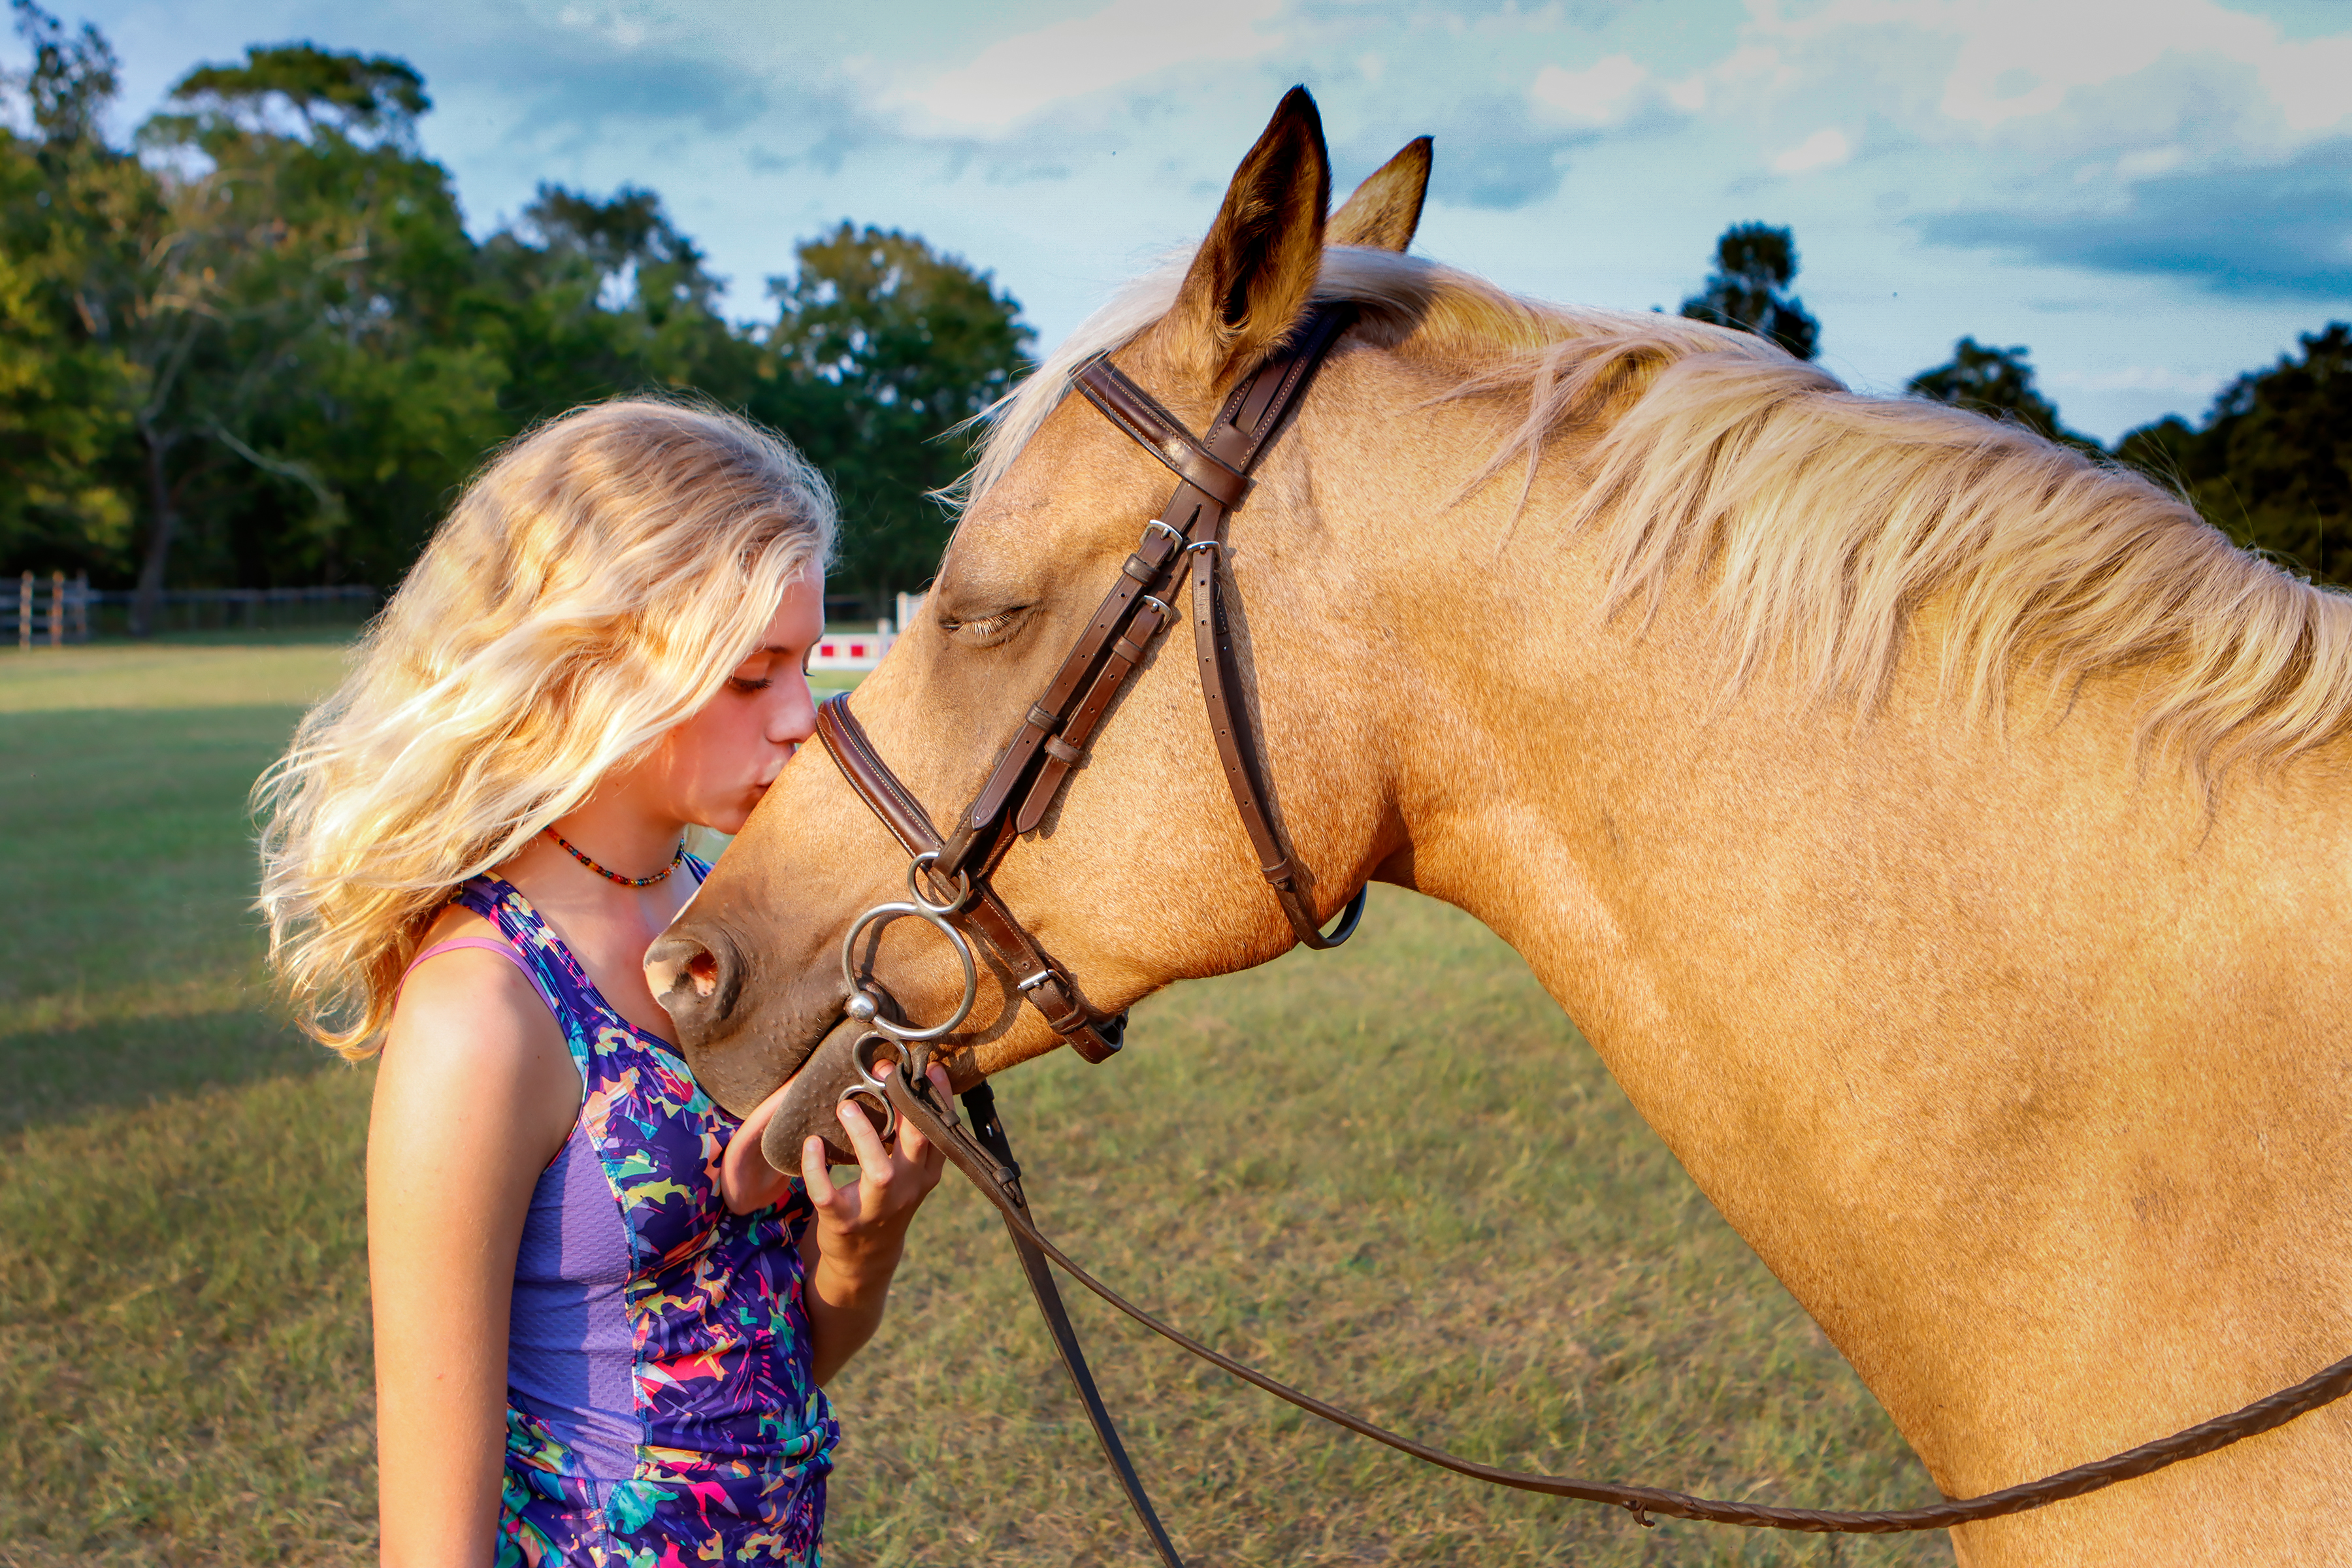 Annabelle Anderson spends a quiet moment with Barley before saddling him. Horses are social animals, and time spent being with them, where nothing is being asked of them, helps grow the relationship between horse and rider. 